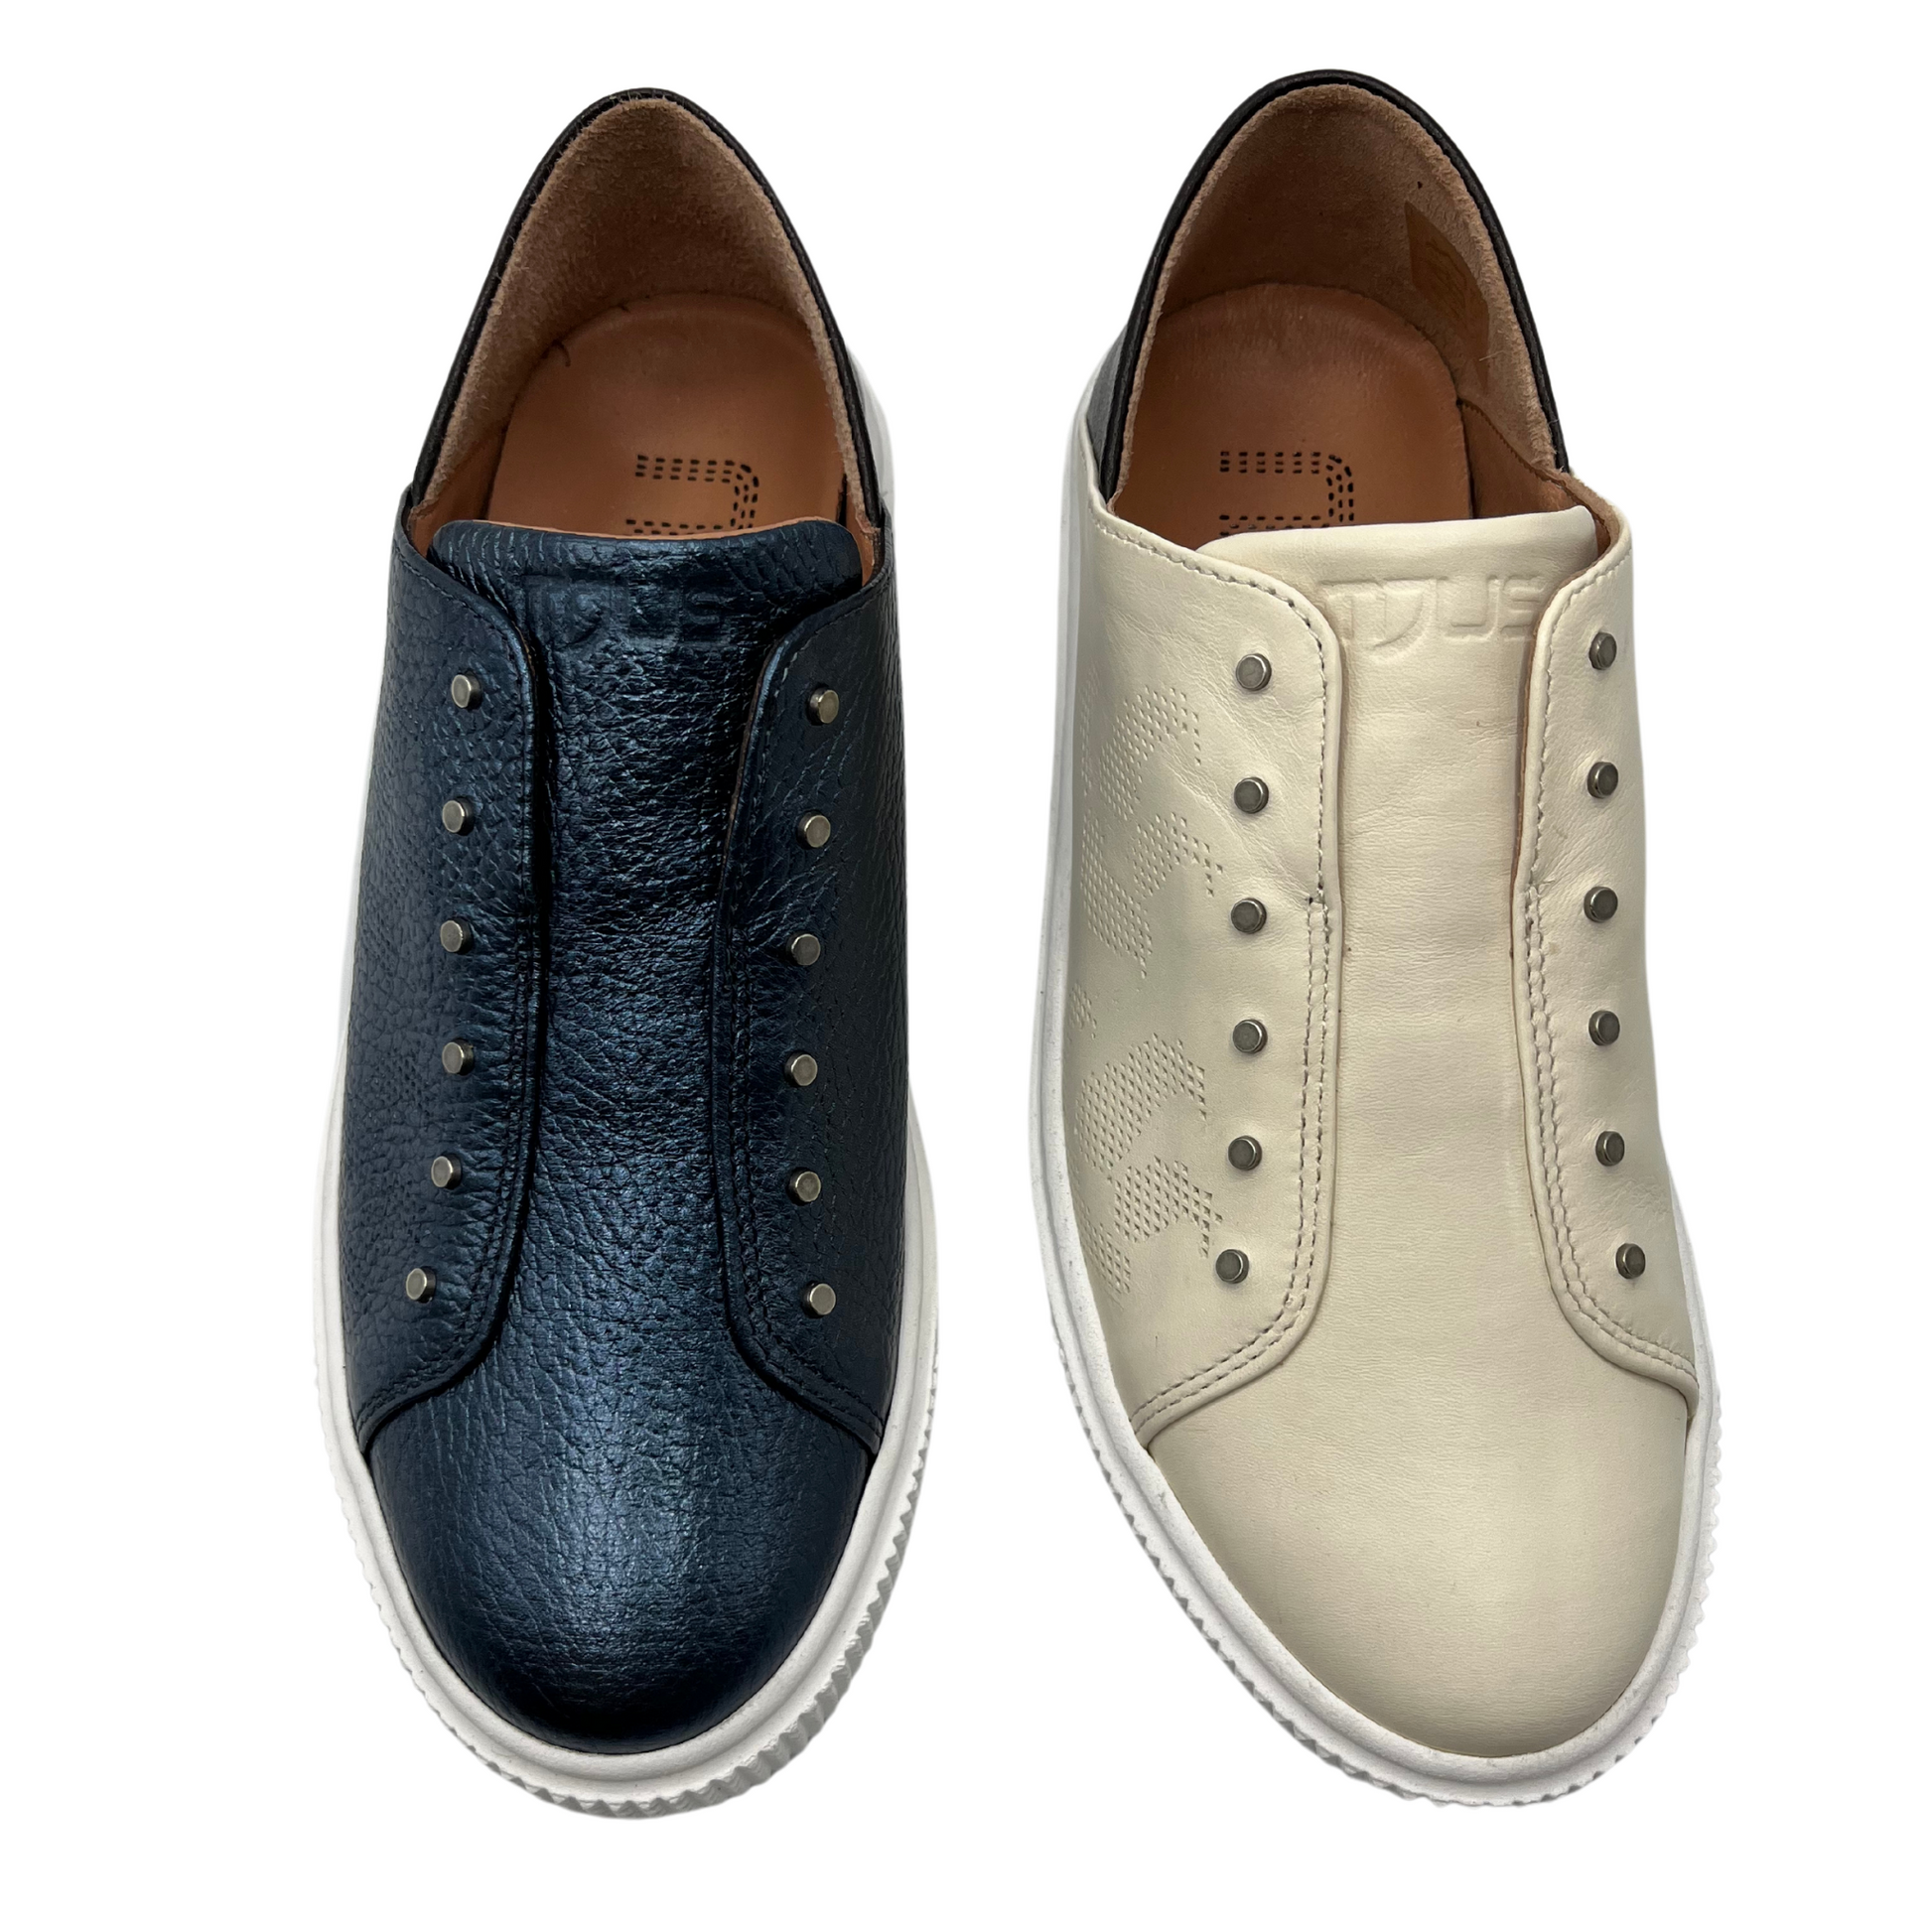 Top view of two leather sneakers side by side. One is navy and one is latte. Both have white rubber outsoles